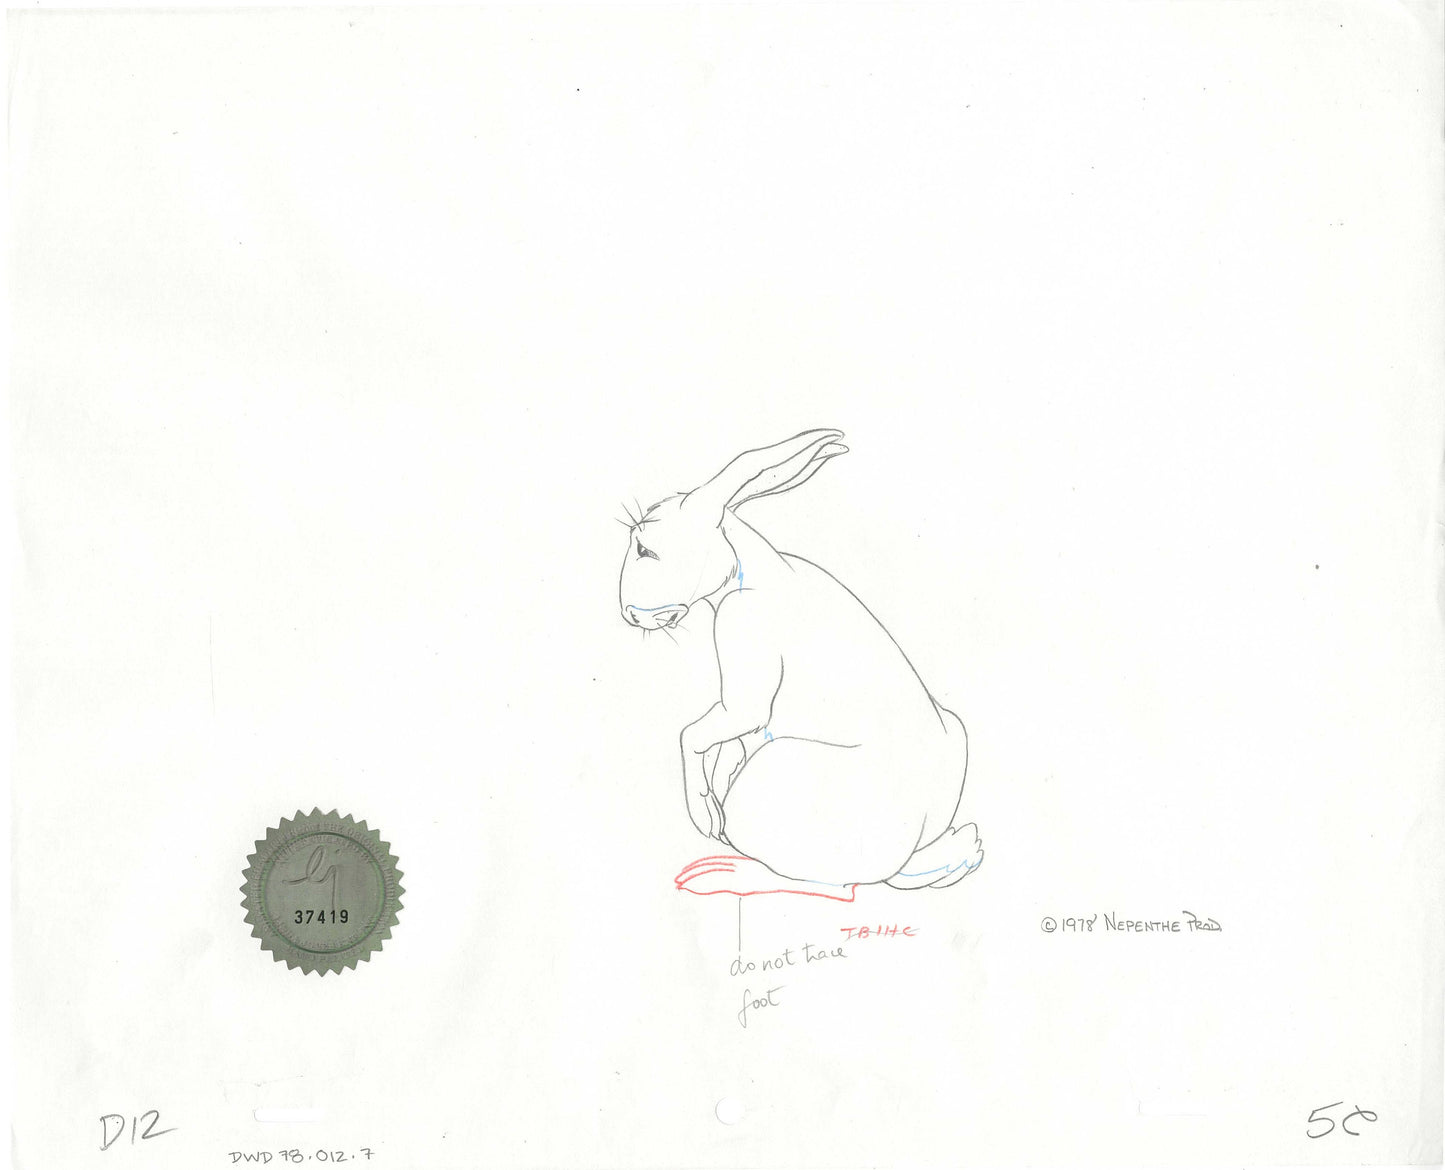 Watership Down 1978 Production Animation Cel Drawing of Cowslip with Linda Jones Enterprise Seal and Certificate of Authenticity 012-007